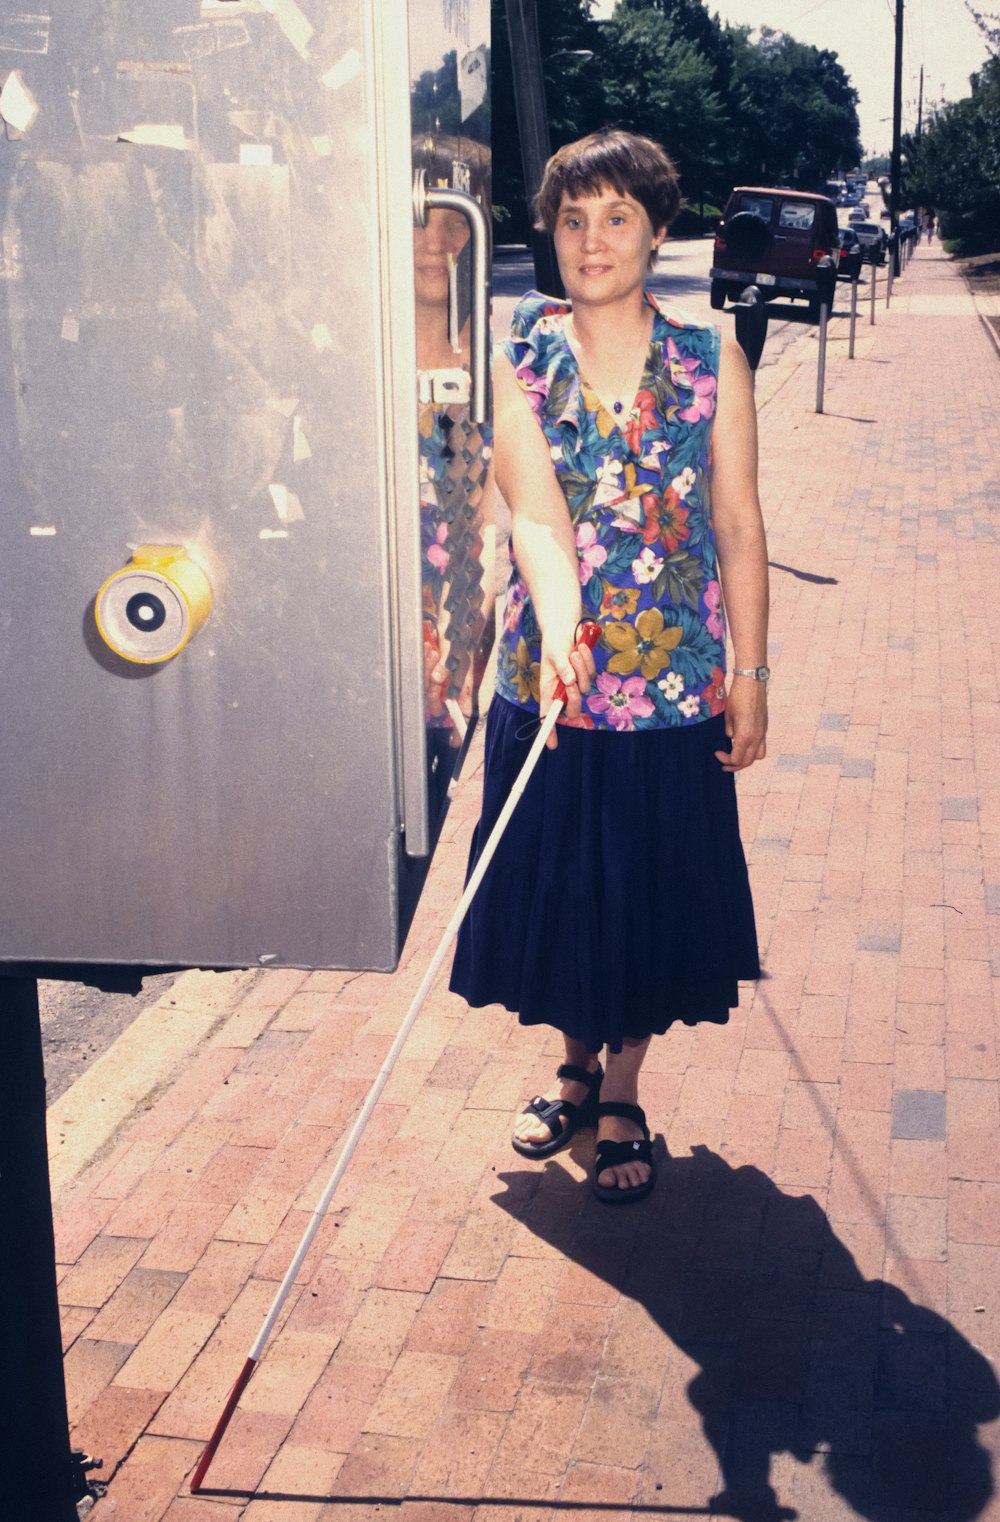 a woman standing next to a bus on a sidewalk